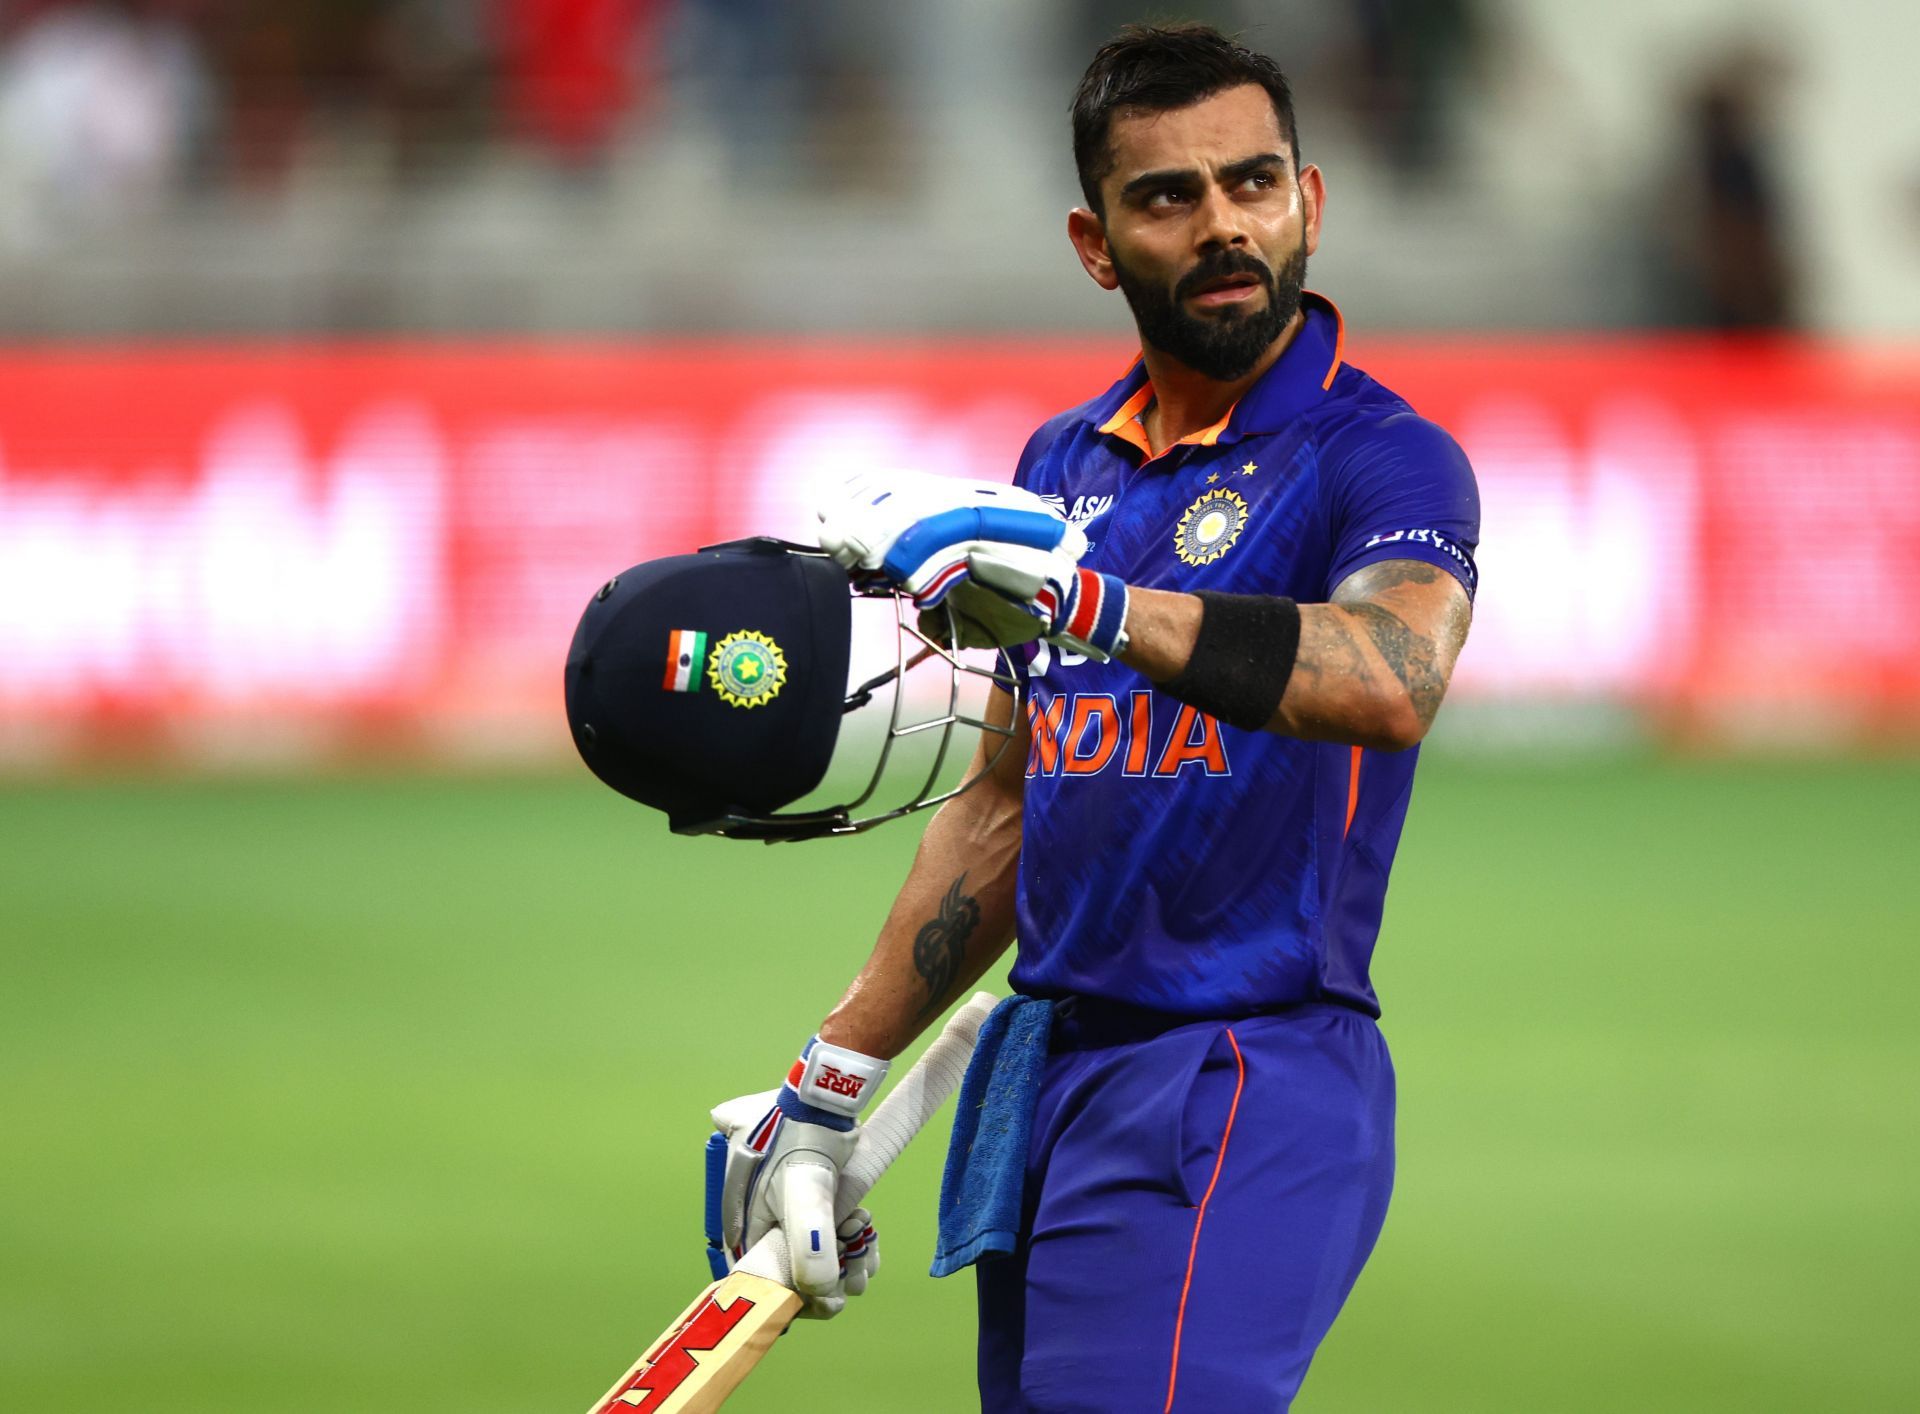 Virat Kohli smashed 12 fours and 6 sixes in his 61-ball knock. (Image: Getty)